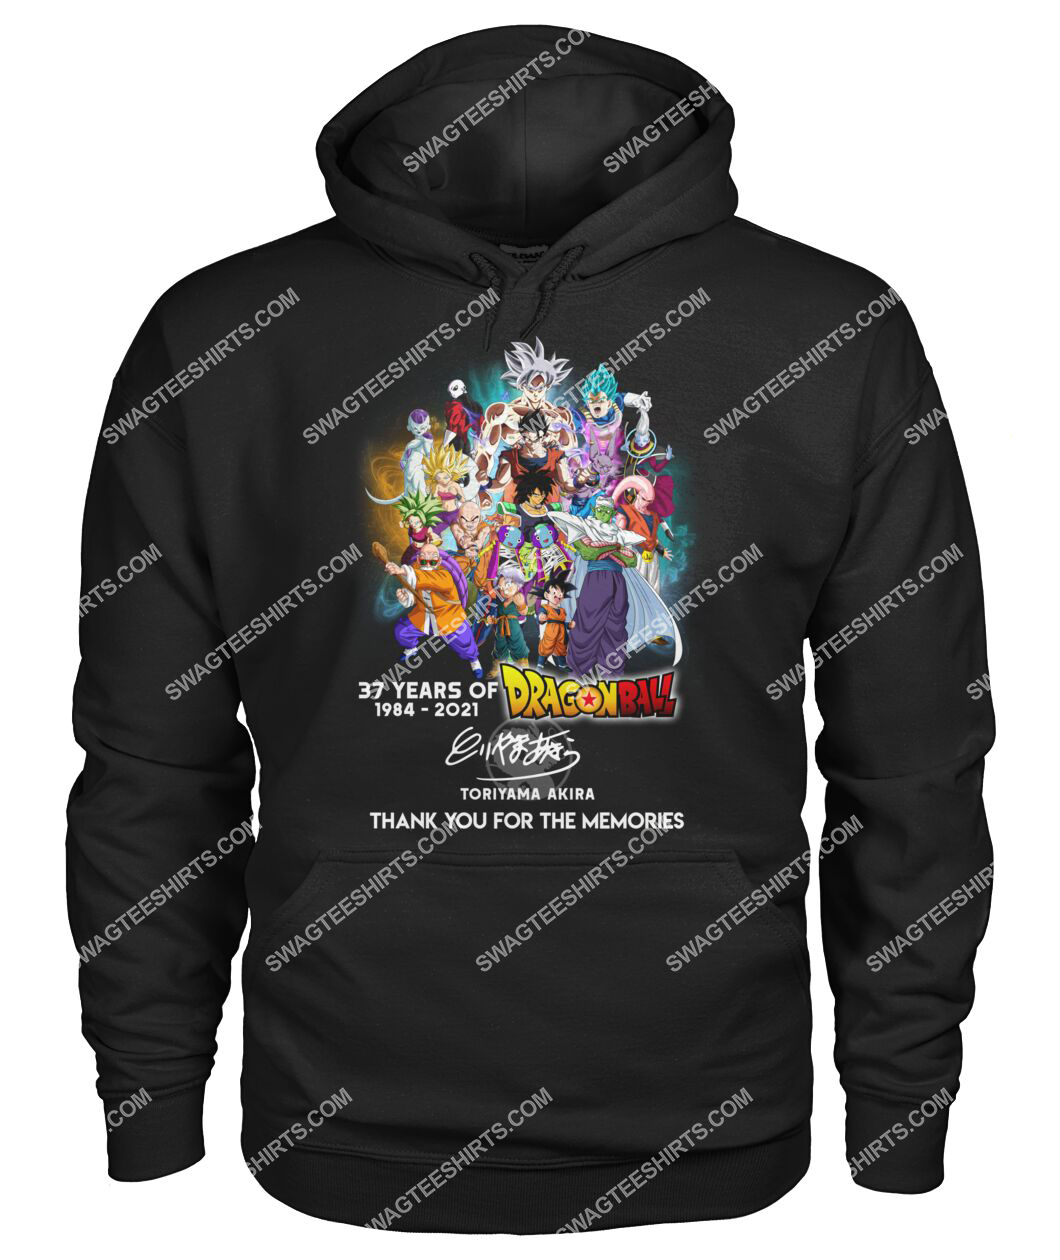 dragon ball z 37 years thank you for memories signatures hoodie 1